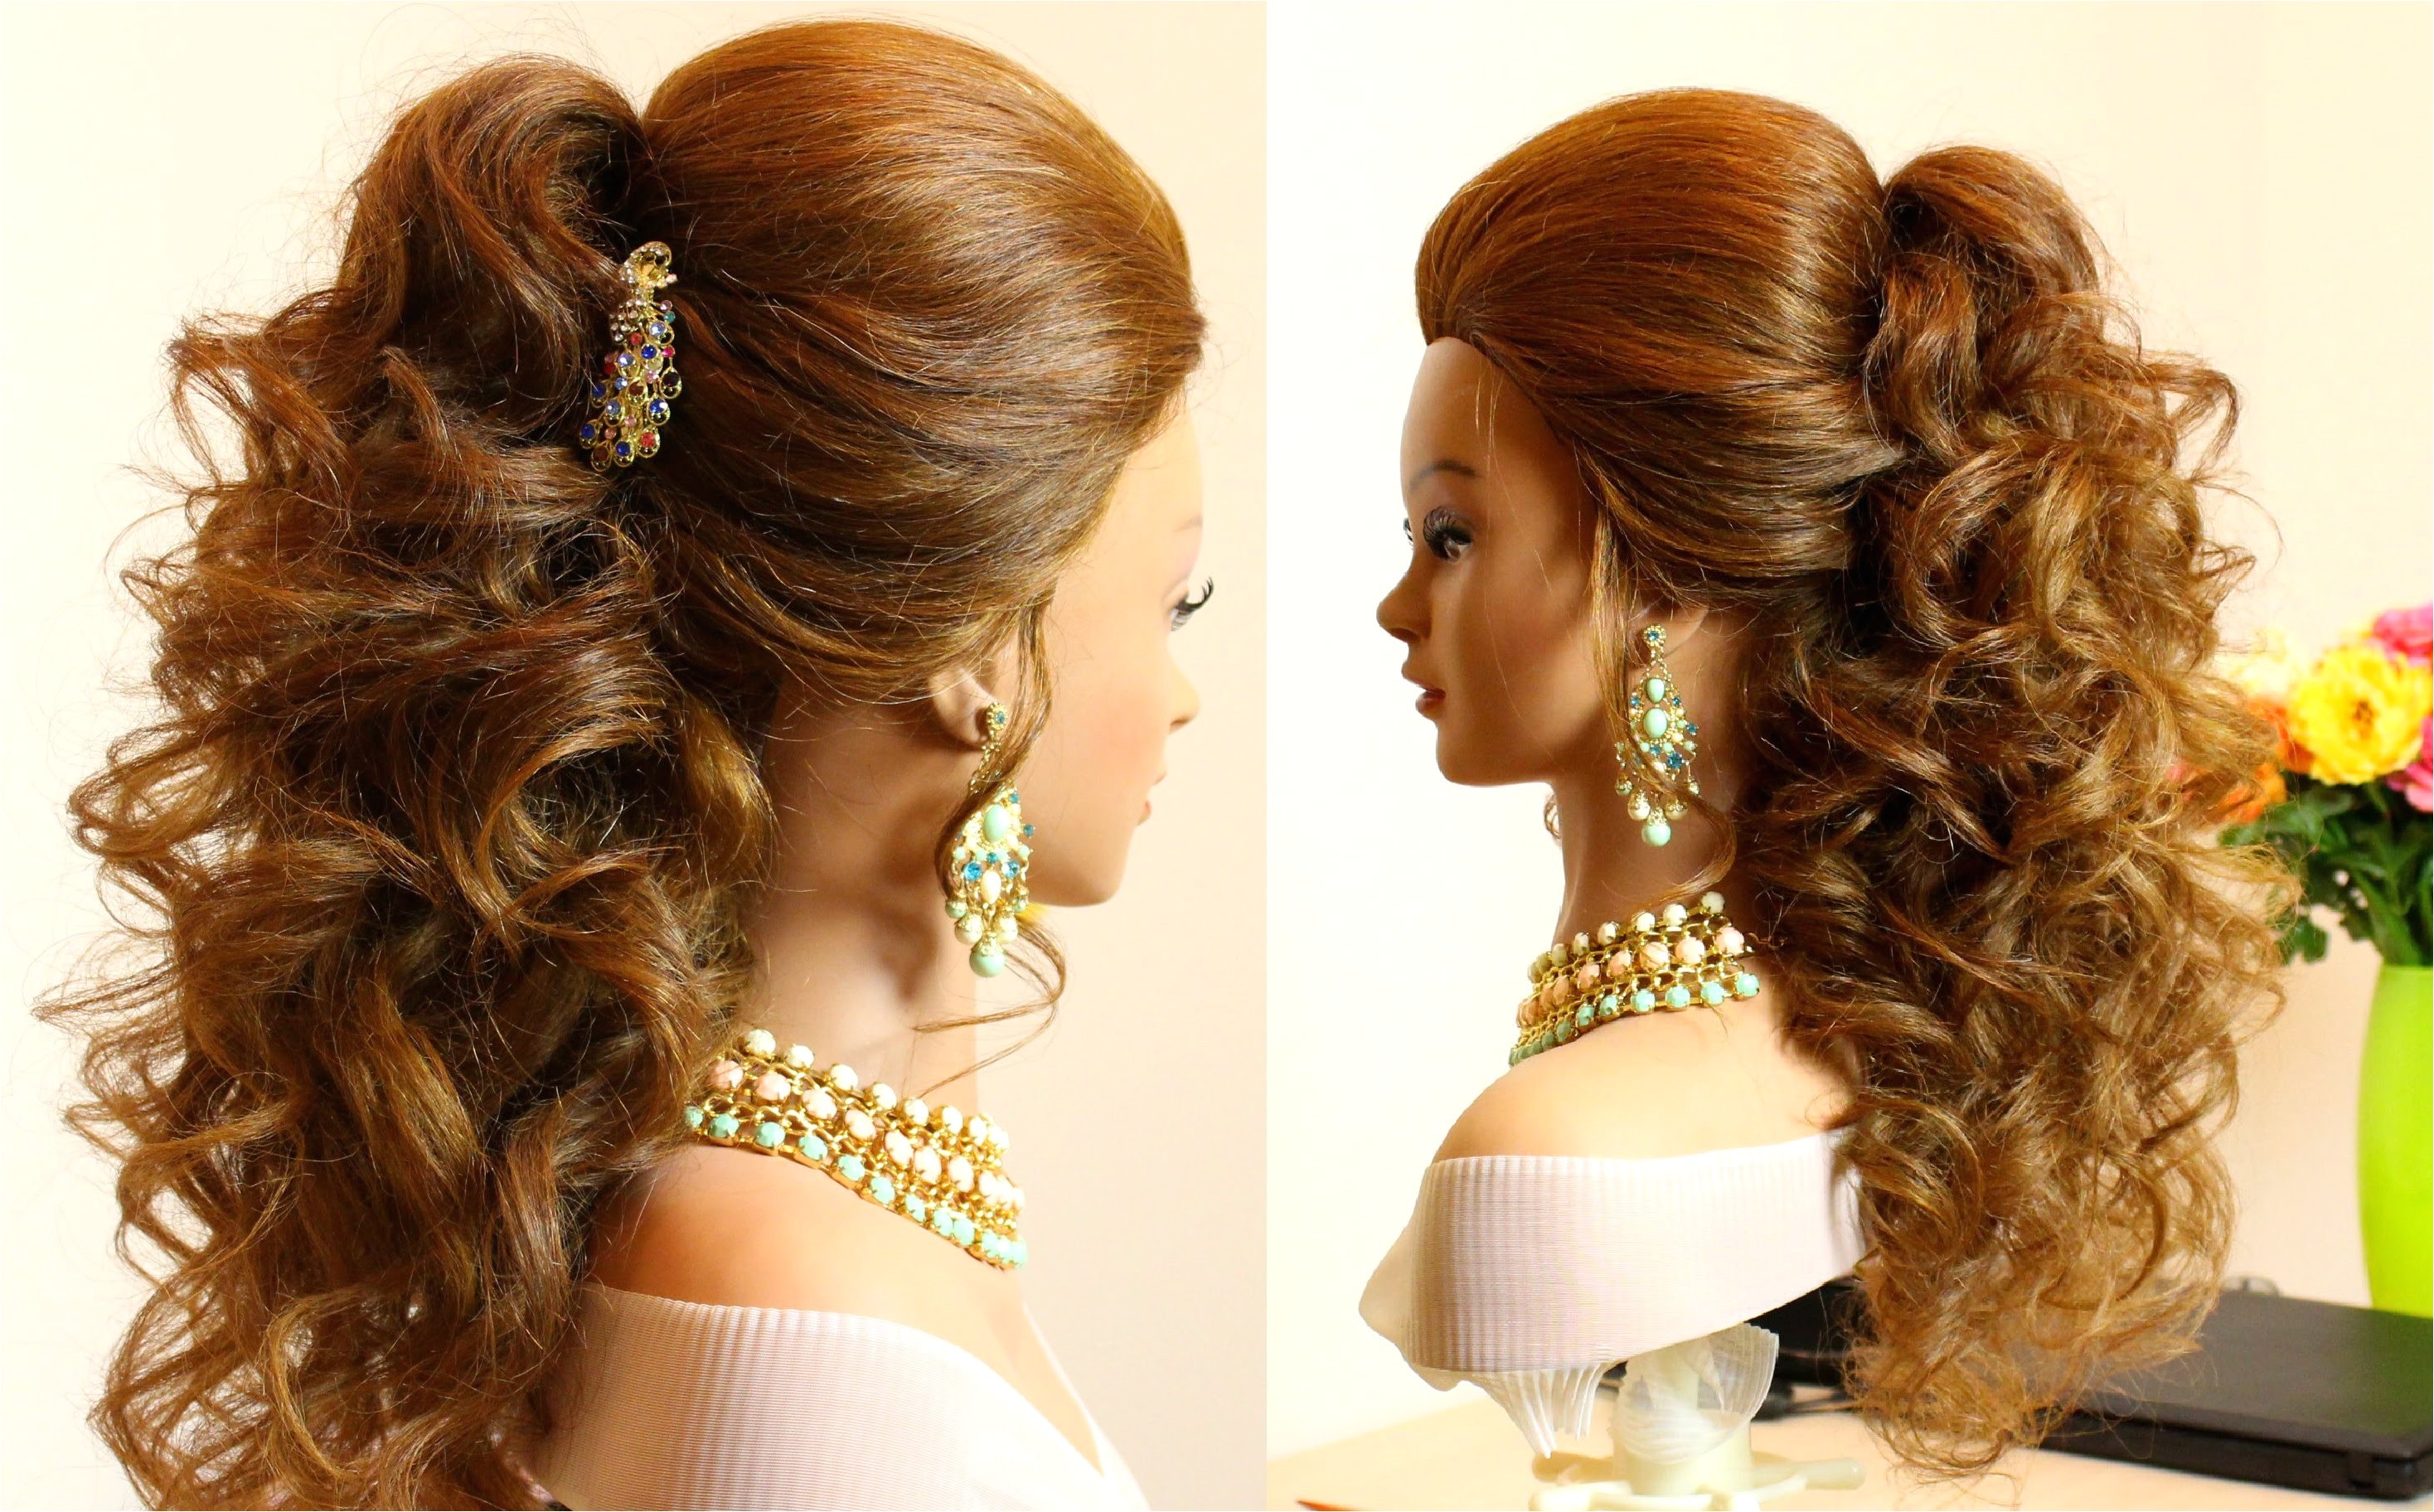 Easy formal Hairstyles for Curly Hair formal Hairstyles for Medium Curly Hair Hairstyle for